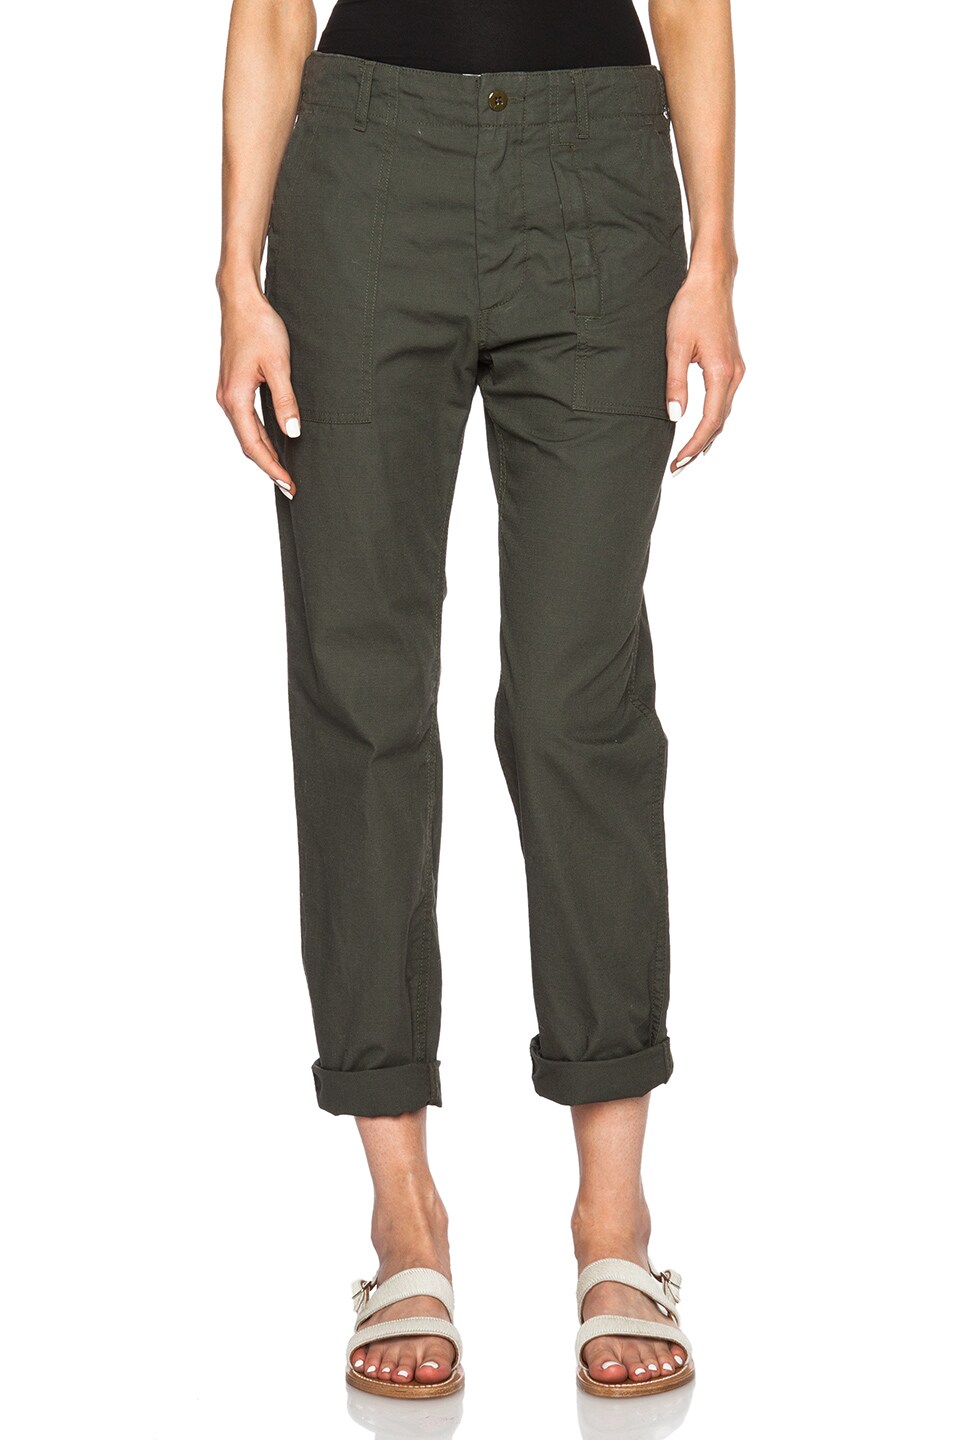 Image 1 of Engineered Garments Fatigue Pants in Olive